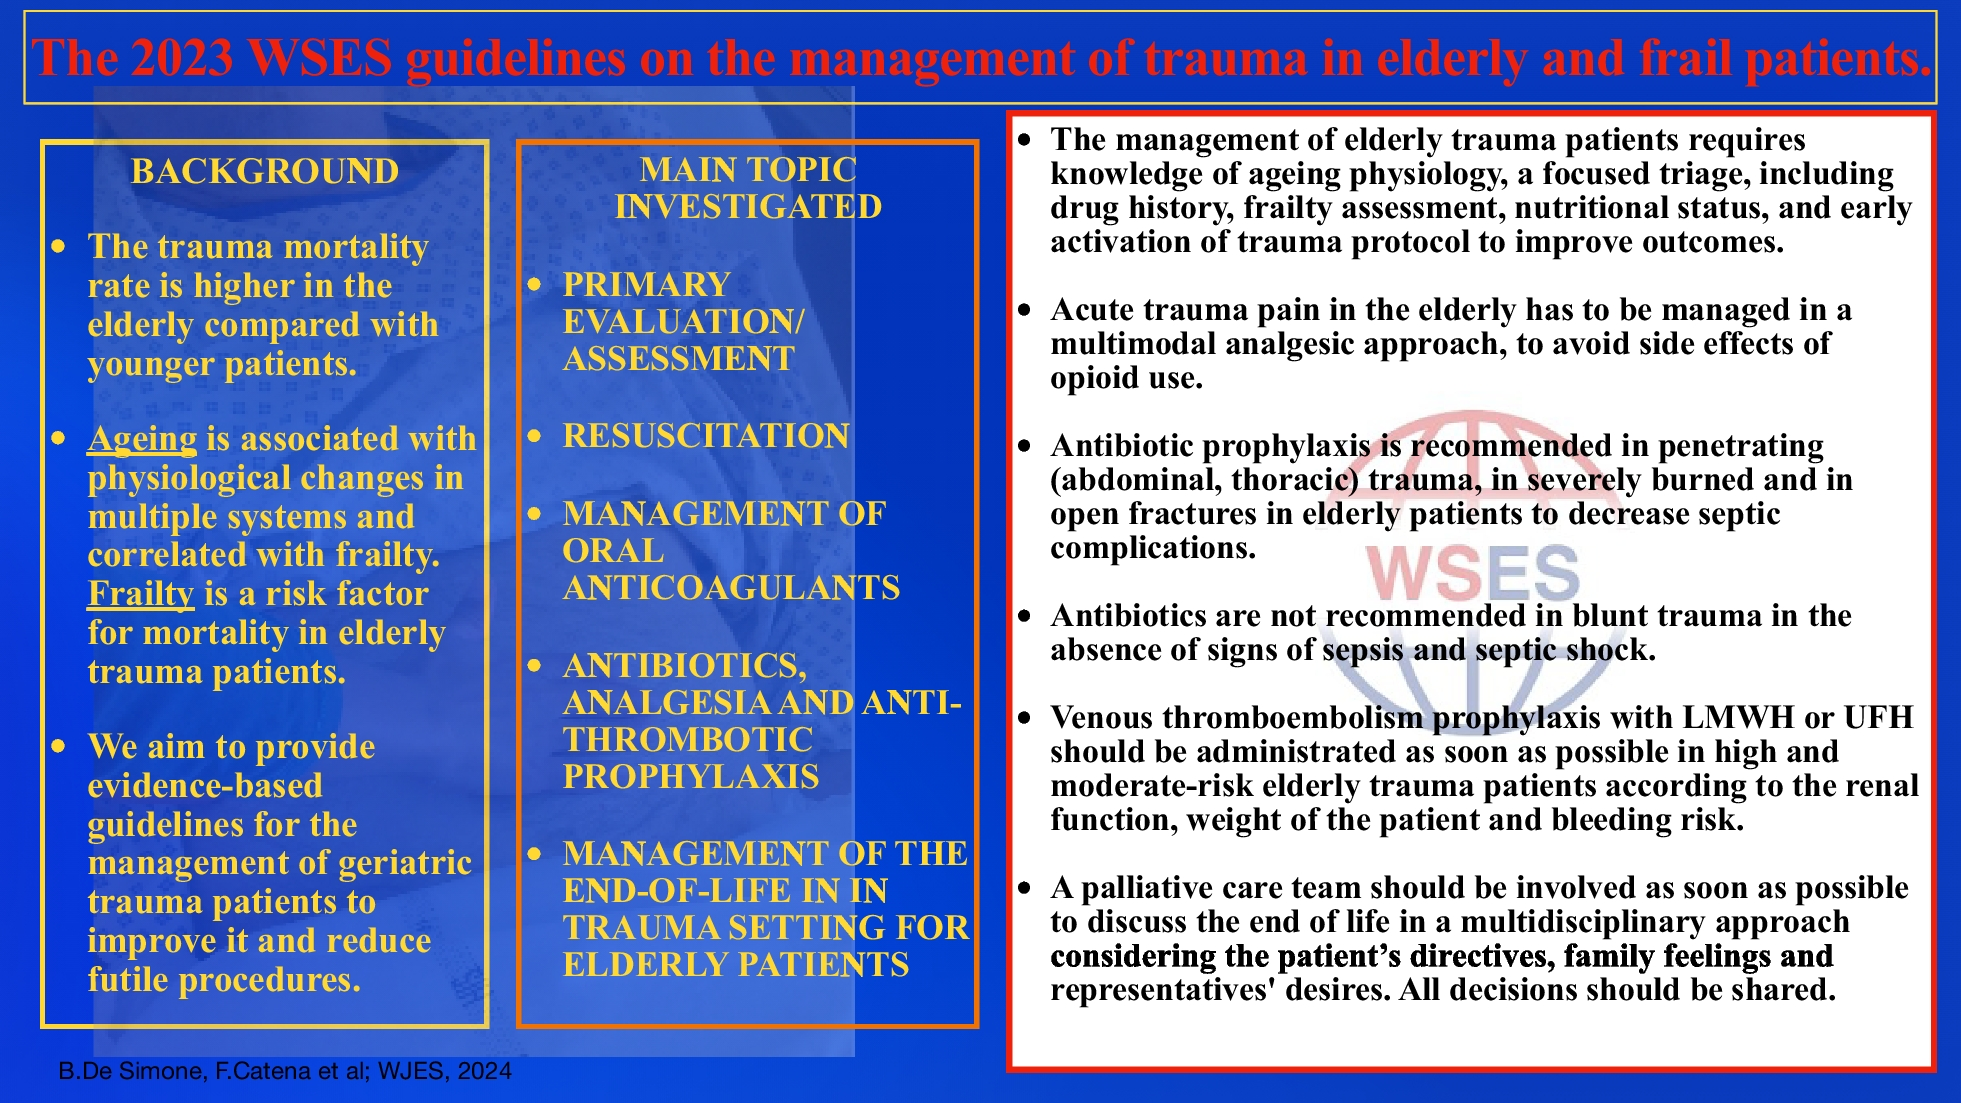 The 2023 WSES guidelines on the management of trauma in elderly and frail patients